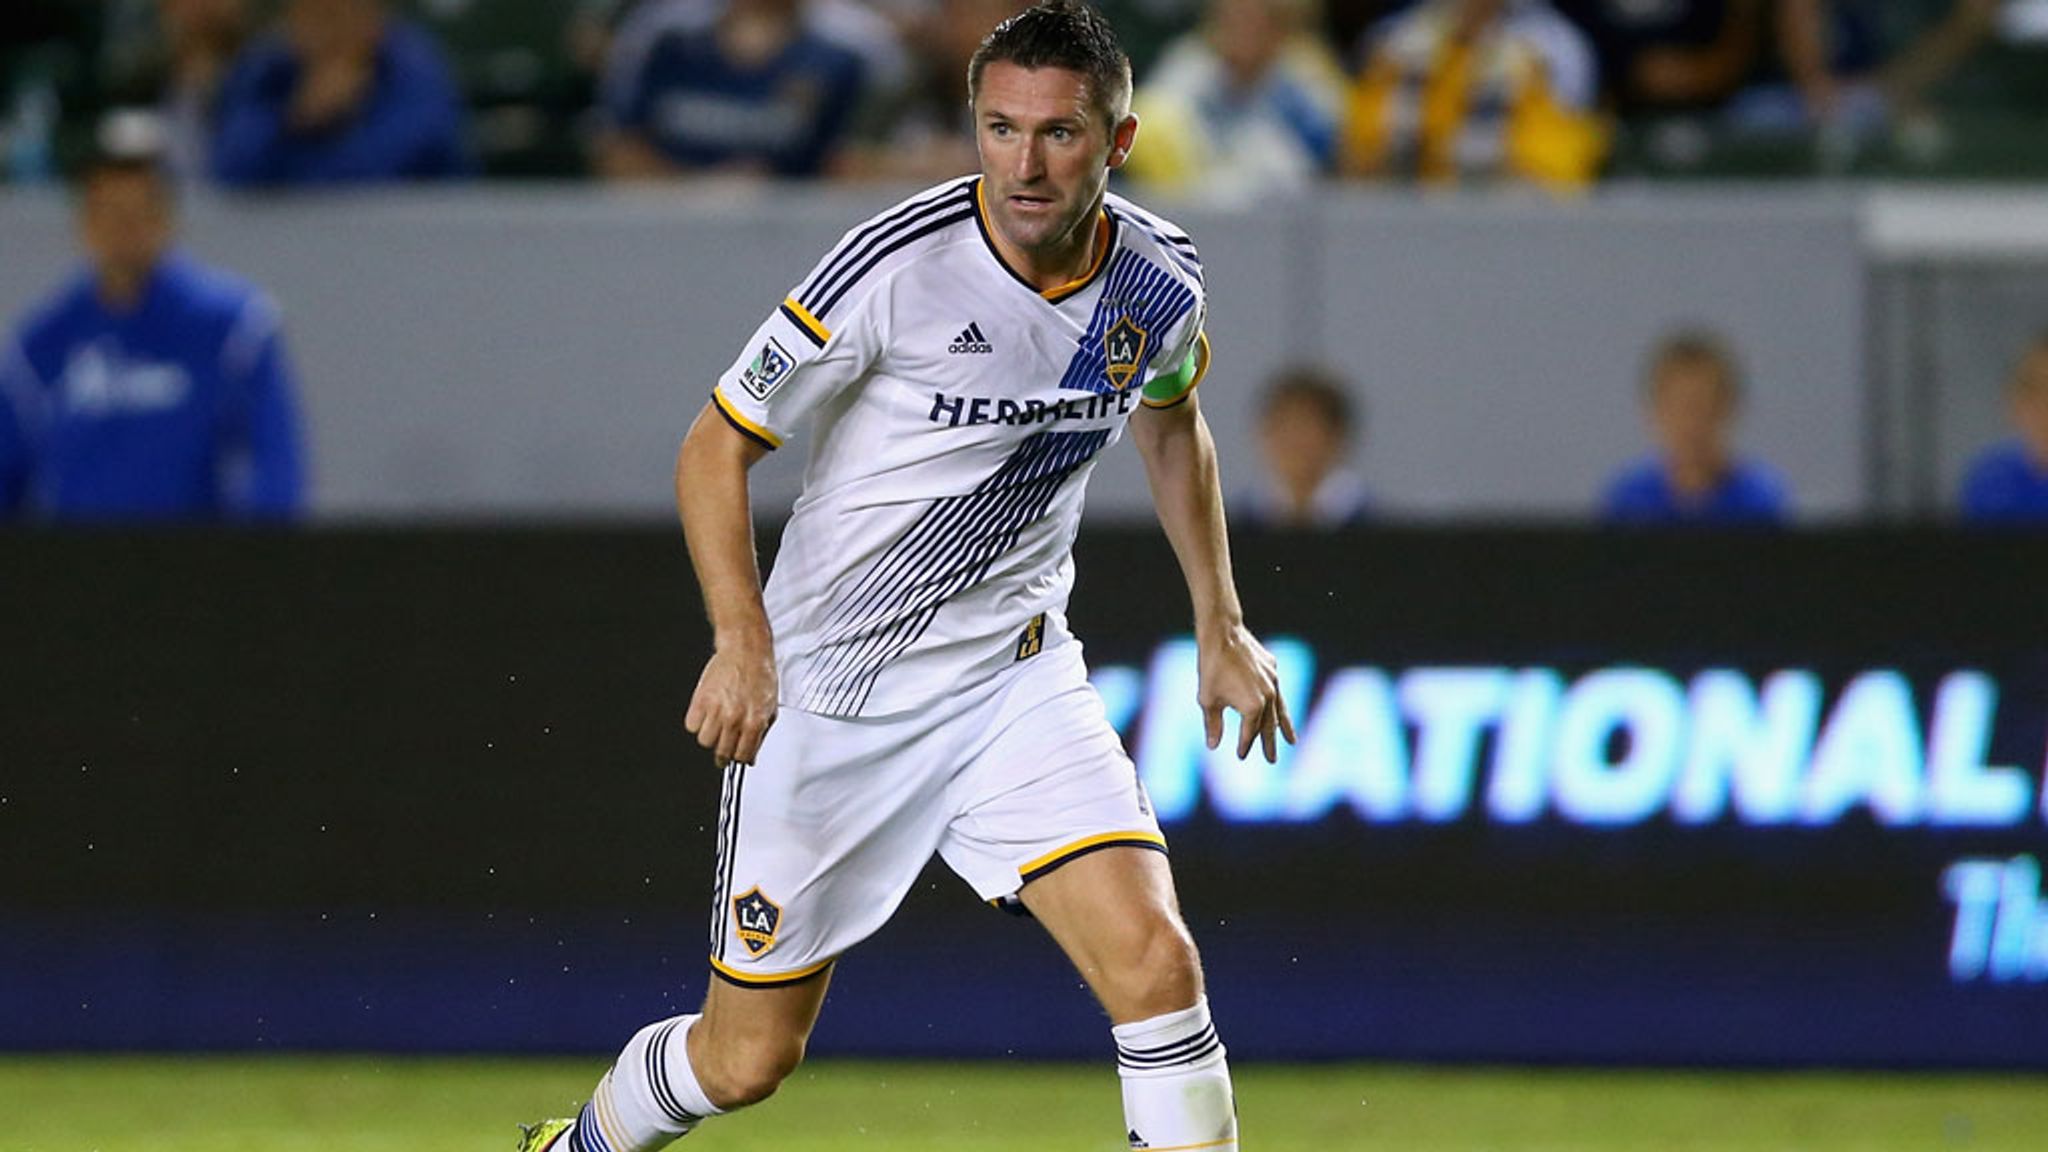 mls-la-galaxy-s-robbie-keane-named-most-valuable-player-football